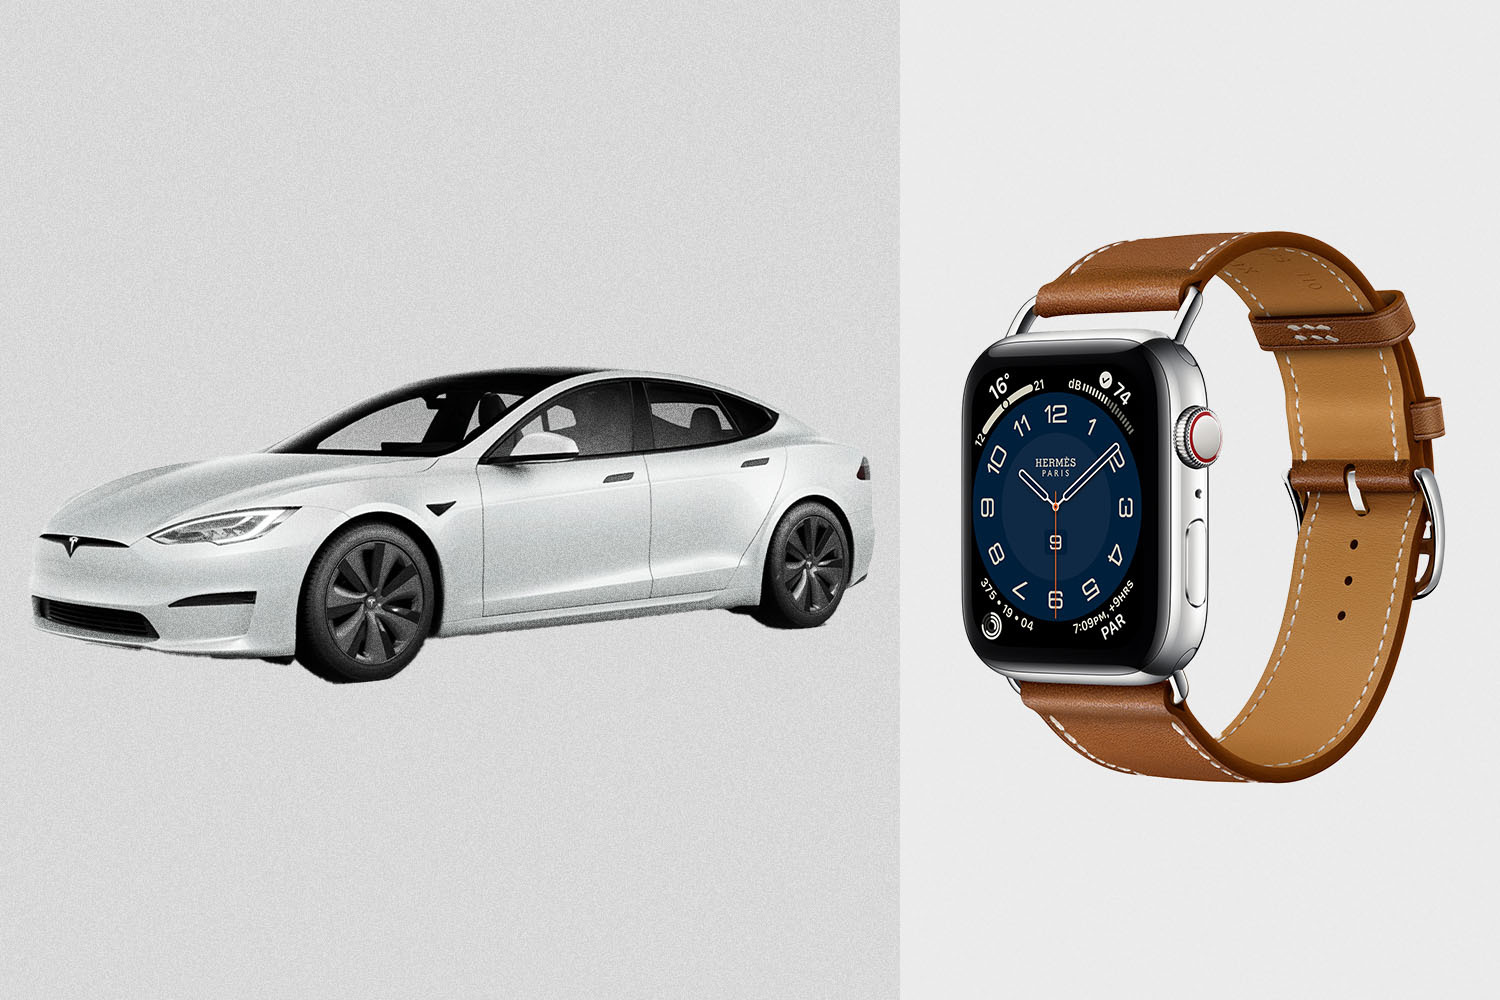 This Apple Watch app will let you control your Tesla from your wrist |  Business Insider India